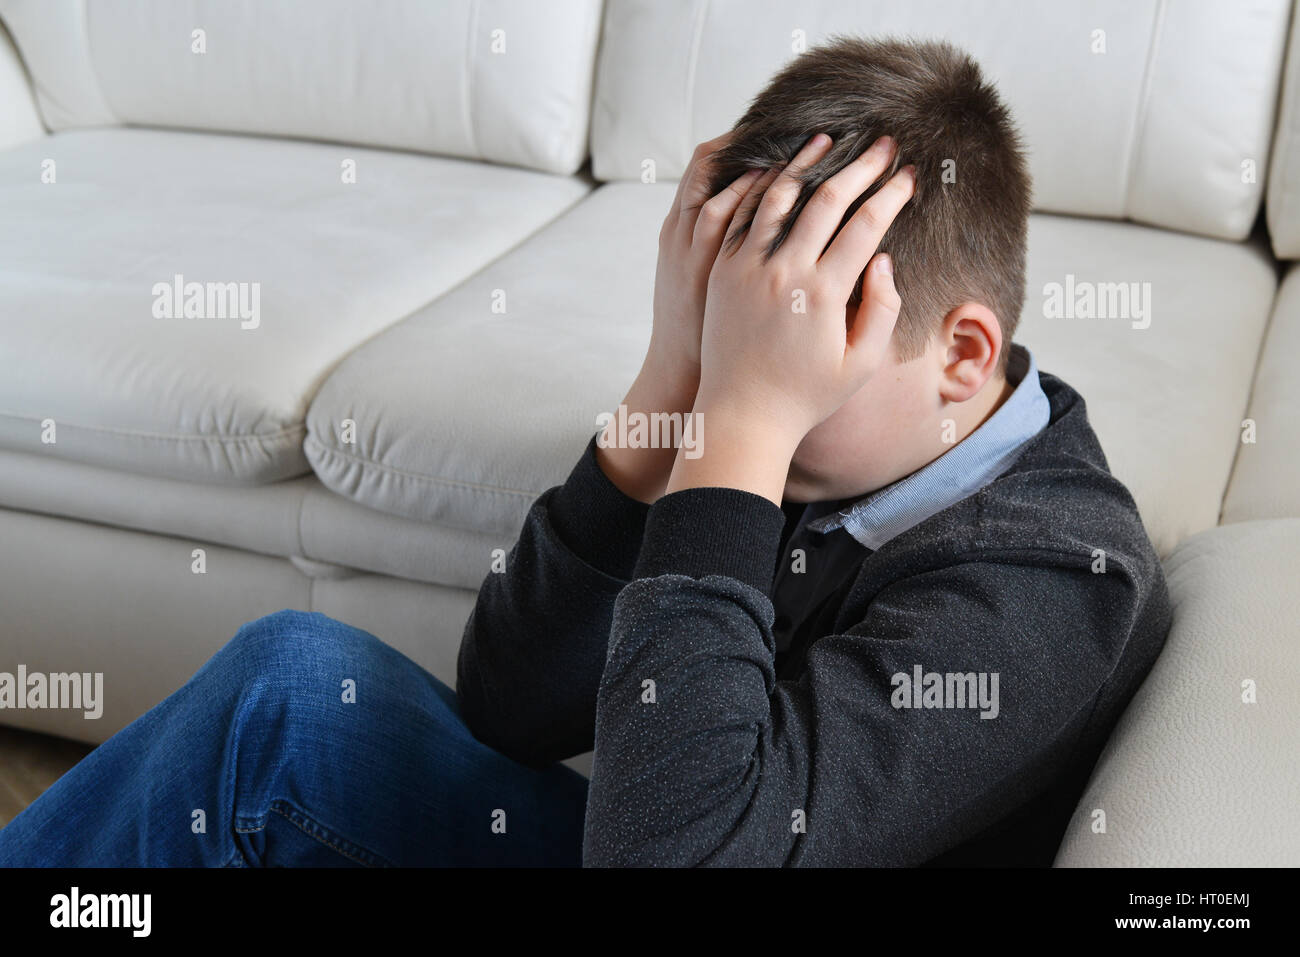 Upset teenager 13 years, he sits near sofa covering her face with her hands Stock Photo